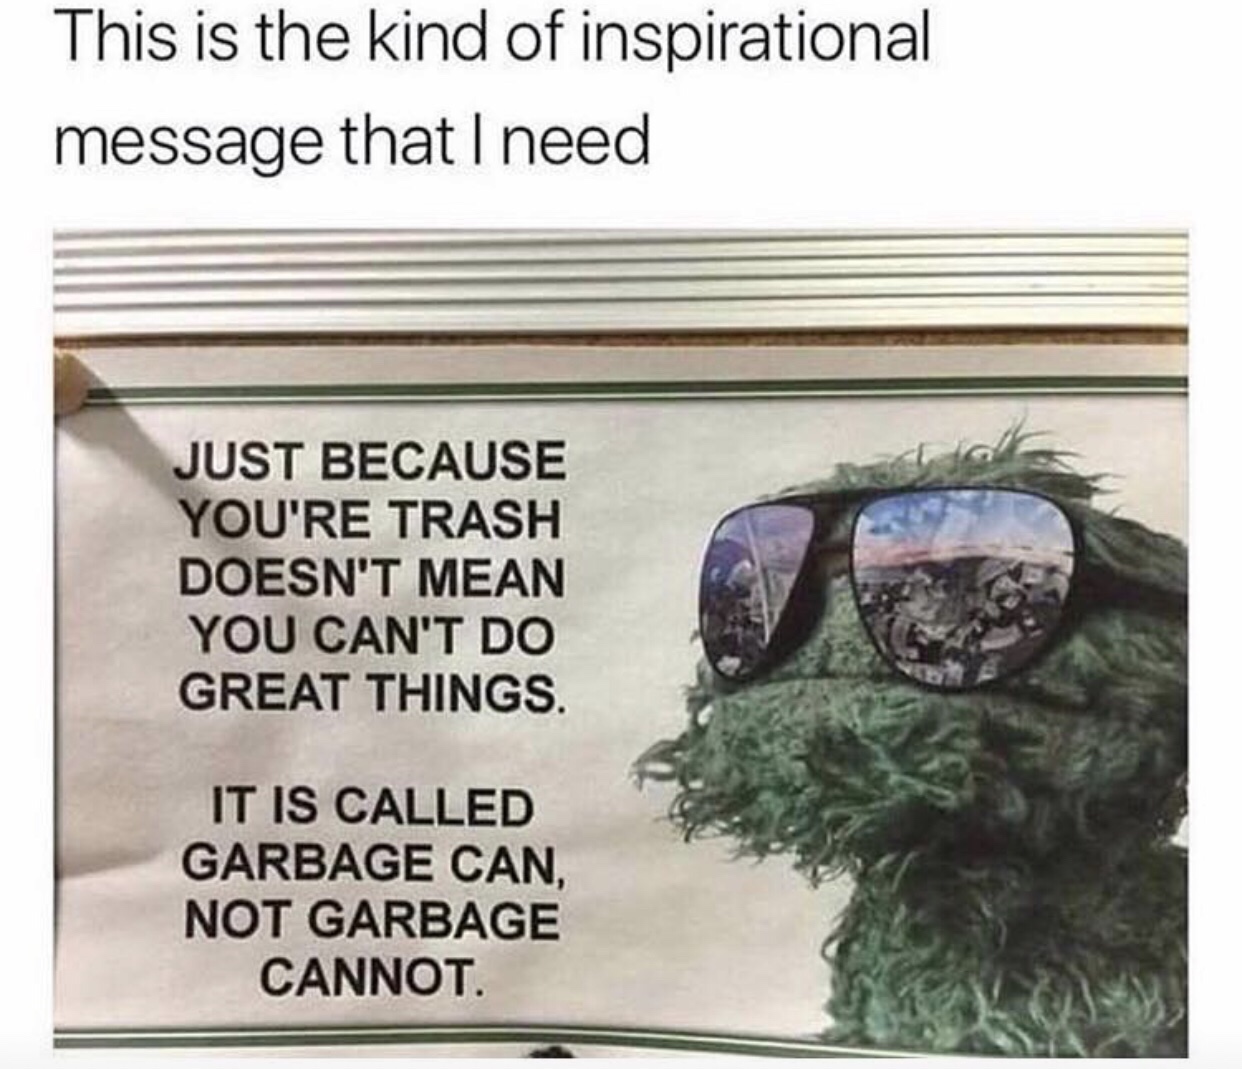 just because you re trash meme - This is the kind of inspirational message that I need Just Because You'Re Trash Doesn'T Mean You Can'T Do Great Things. It Is Called Garbage Can, Not Garbage Cannot.